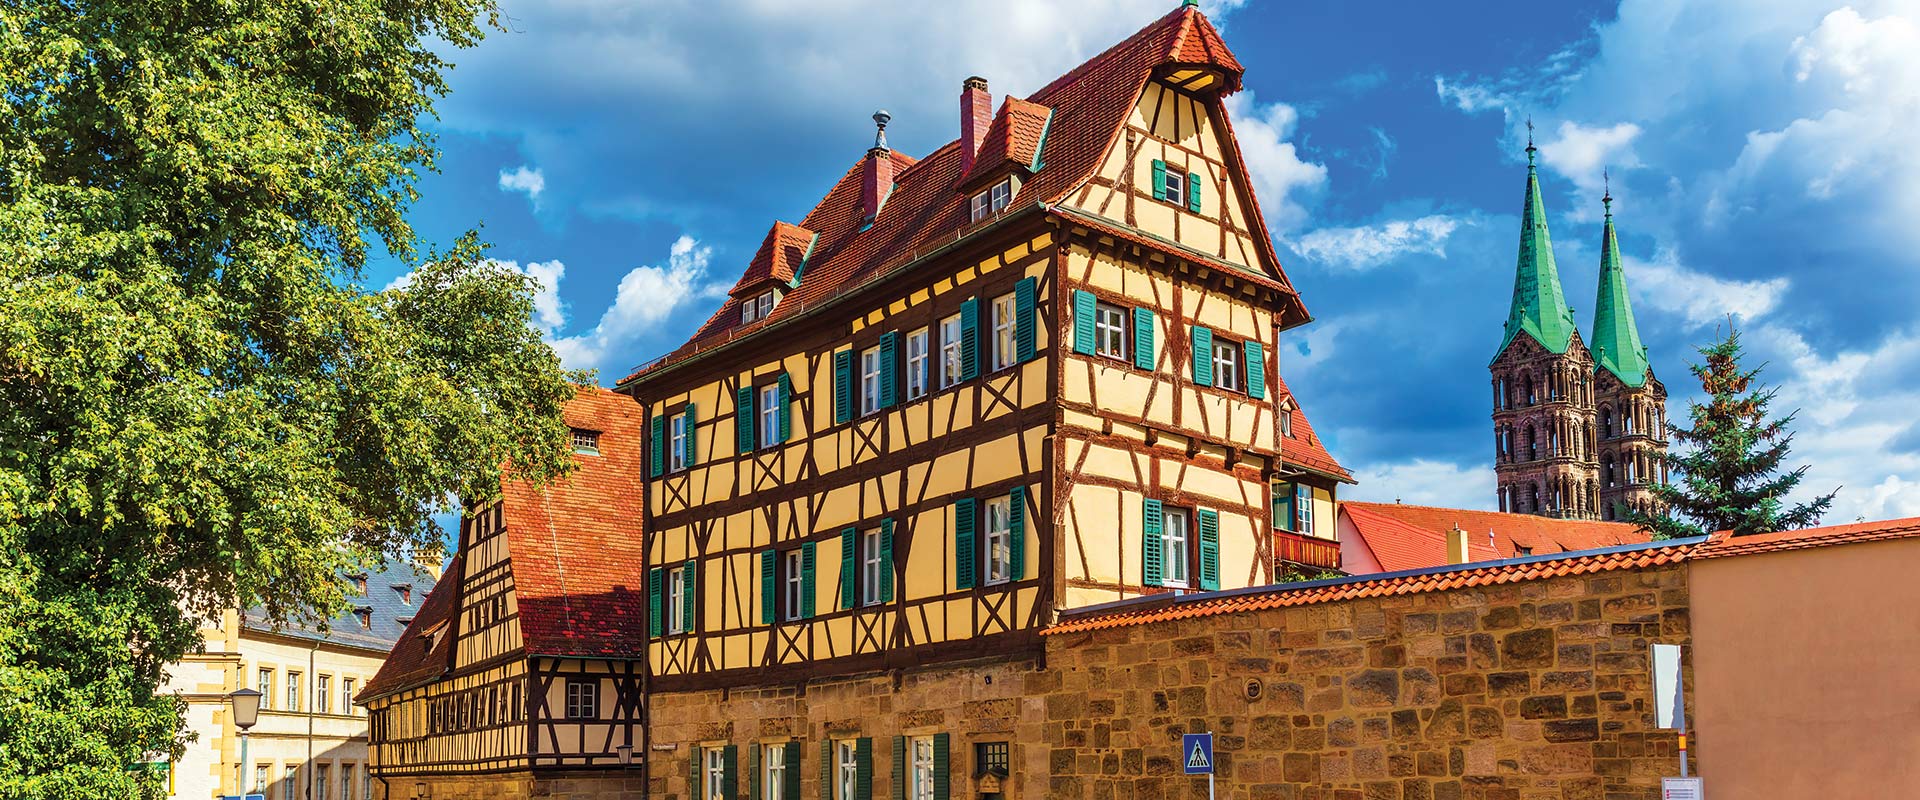 Historical building with yellow facade and red roof and framework, Bamberg